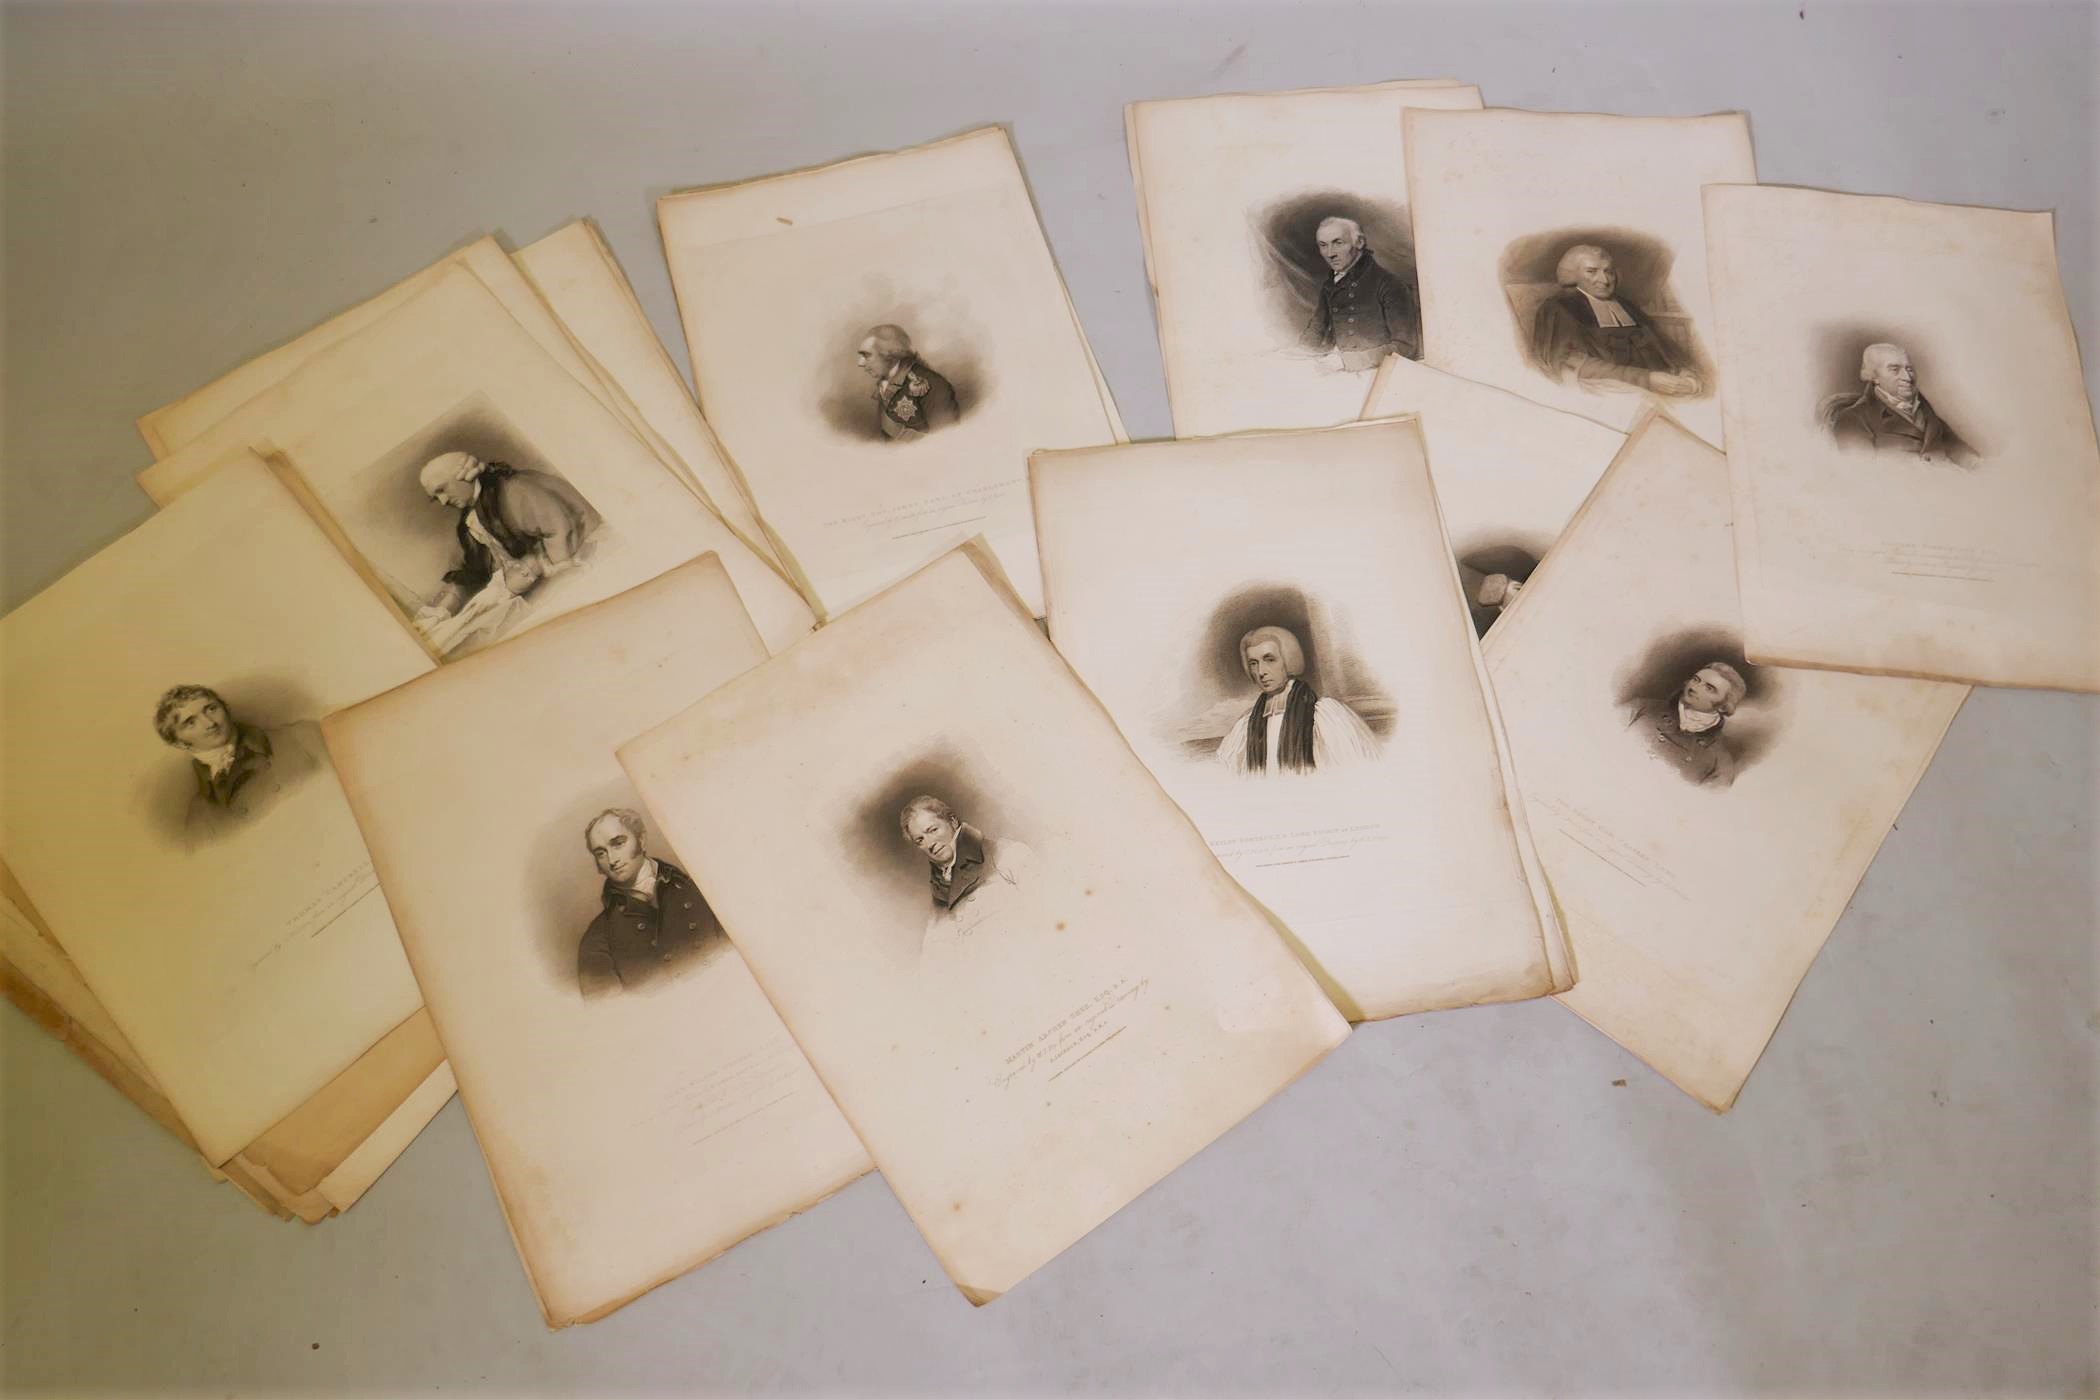 A quantity of early C19th engravings, portraits after Lawrence, Raeburn etc, published by T.